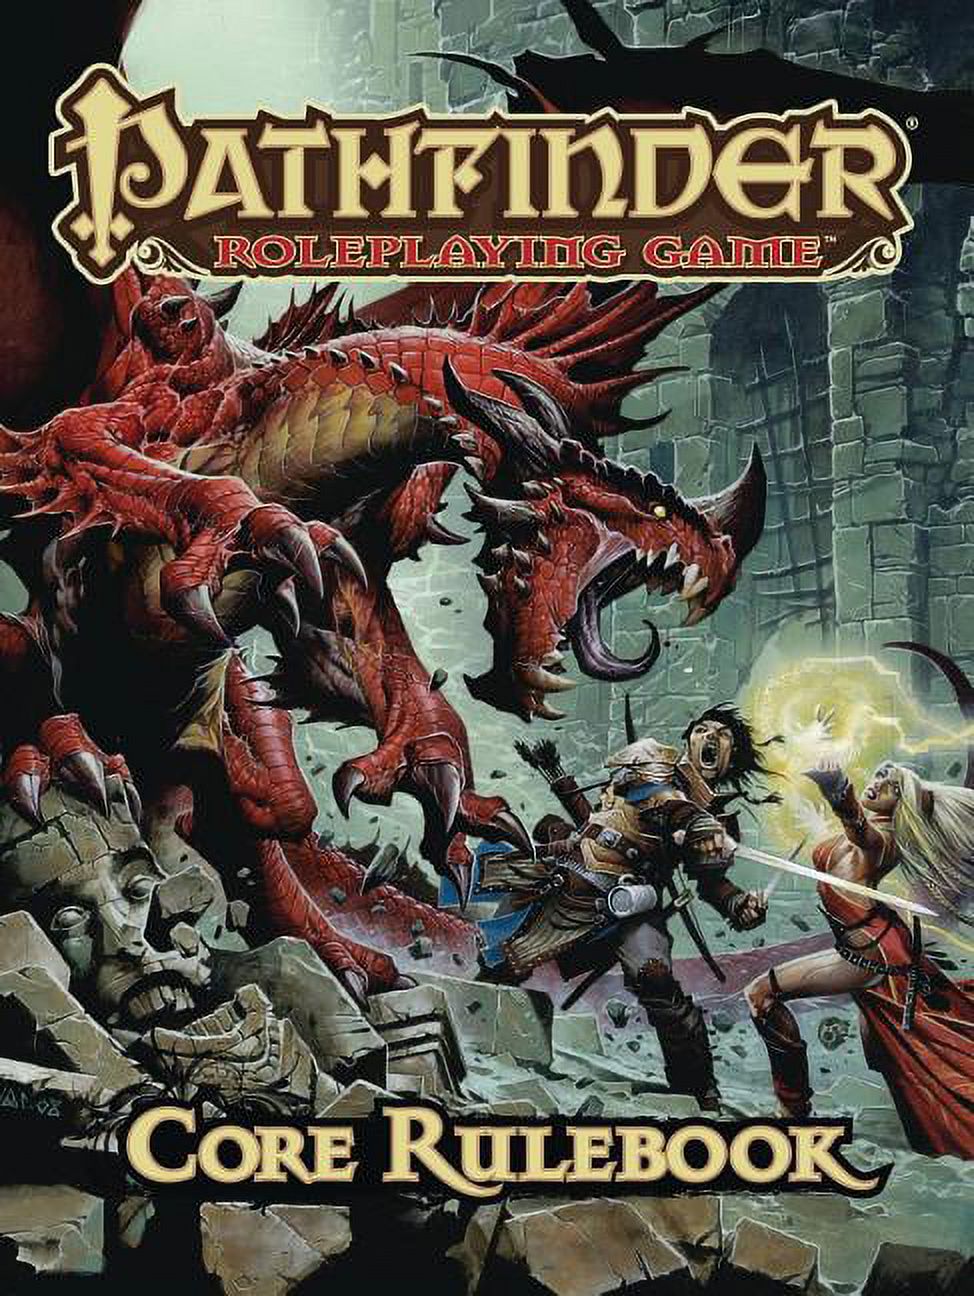 Pathfinder Roleplaying Game: Pathfinder Roleplaying Game: Core Rulebook (Hardcover) - image 1 of 2